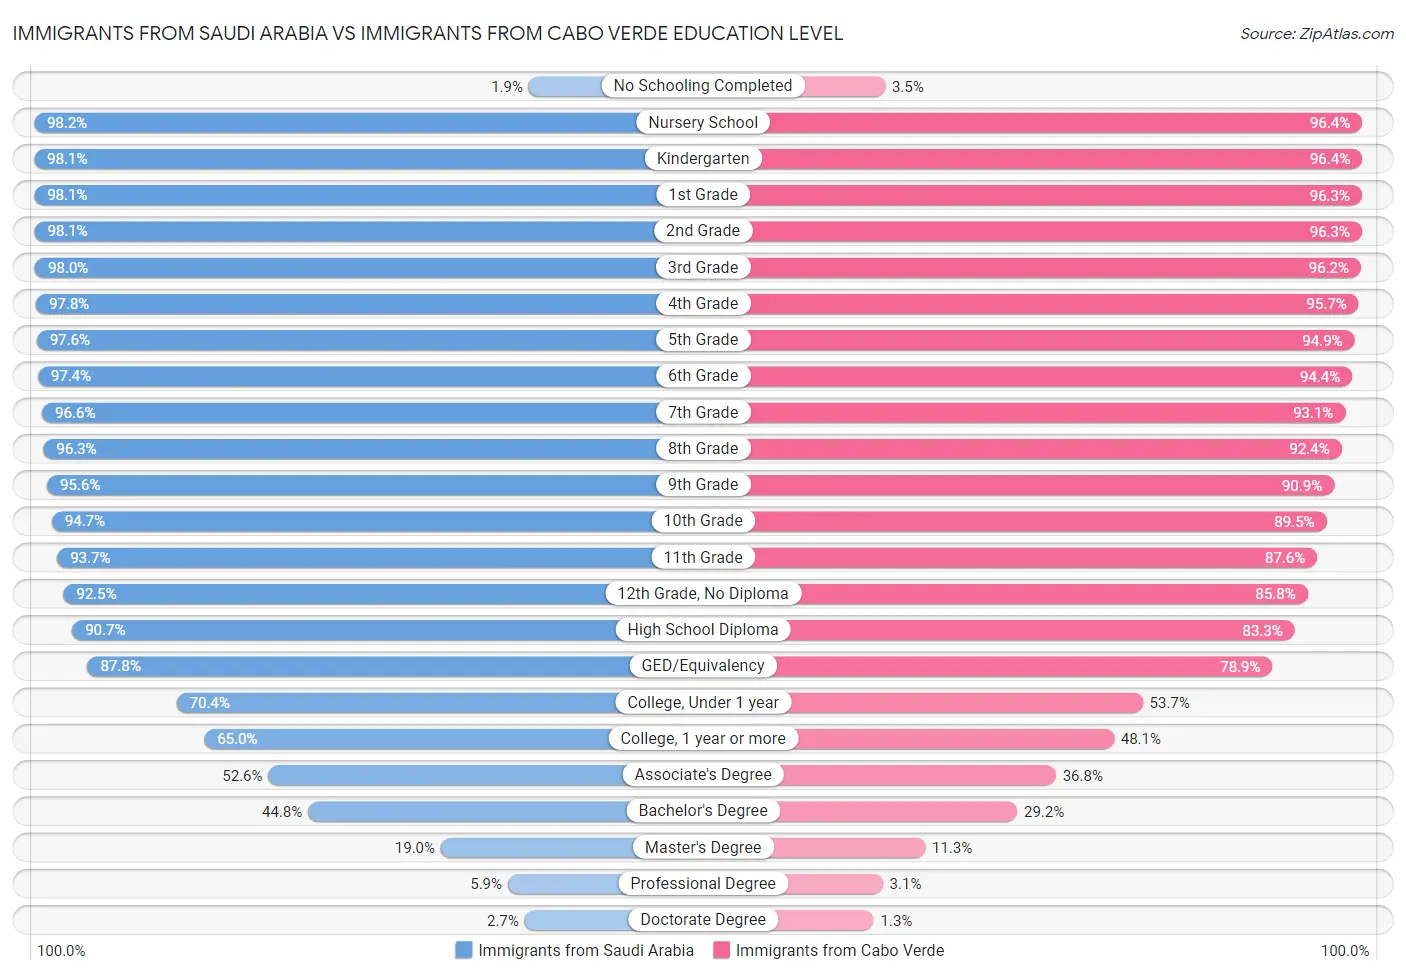 Immigrants from Saudi Arabia vs Immigrants from Cabo Verde Education Level